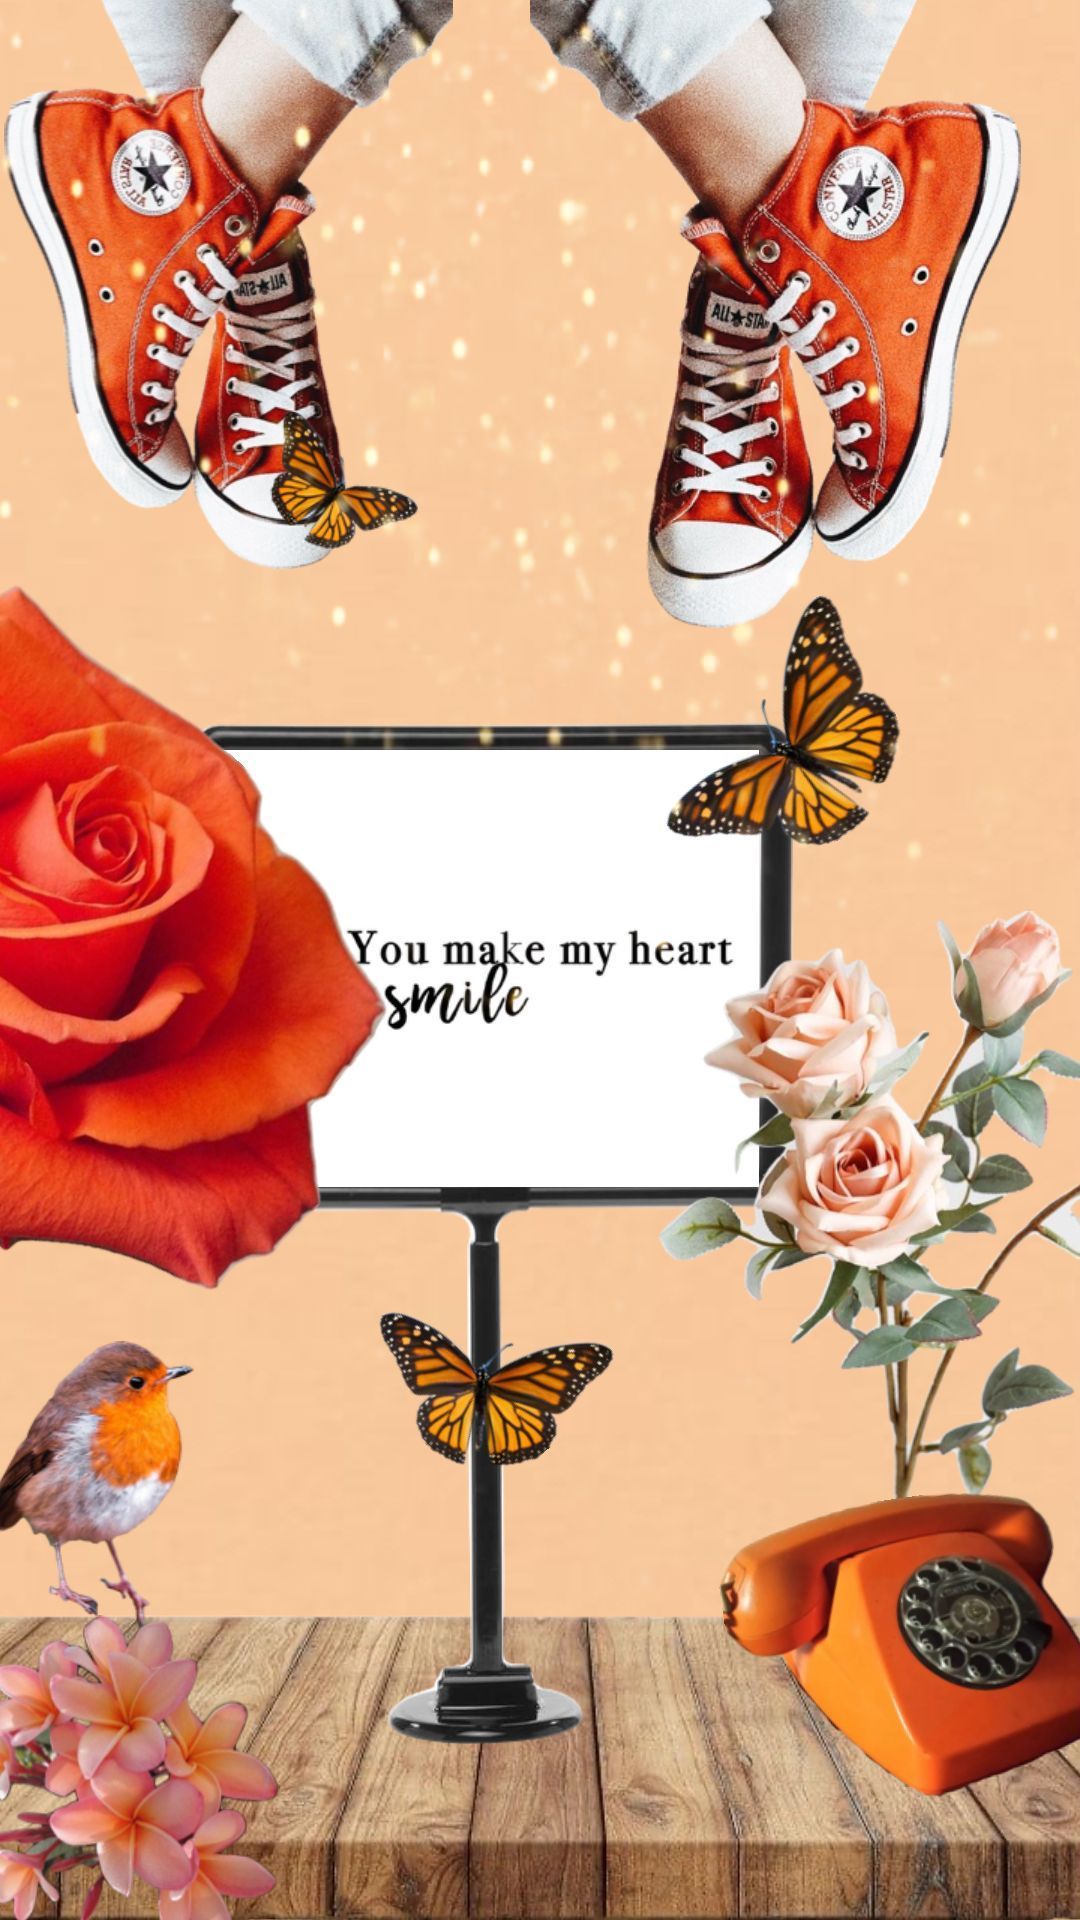 Collage of a girl's feet in orange converse, flowers, butterflies, and a rotary phone. - Converse